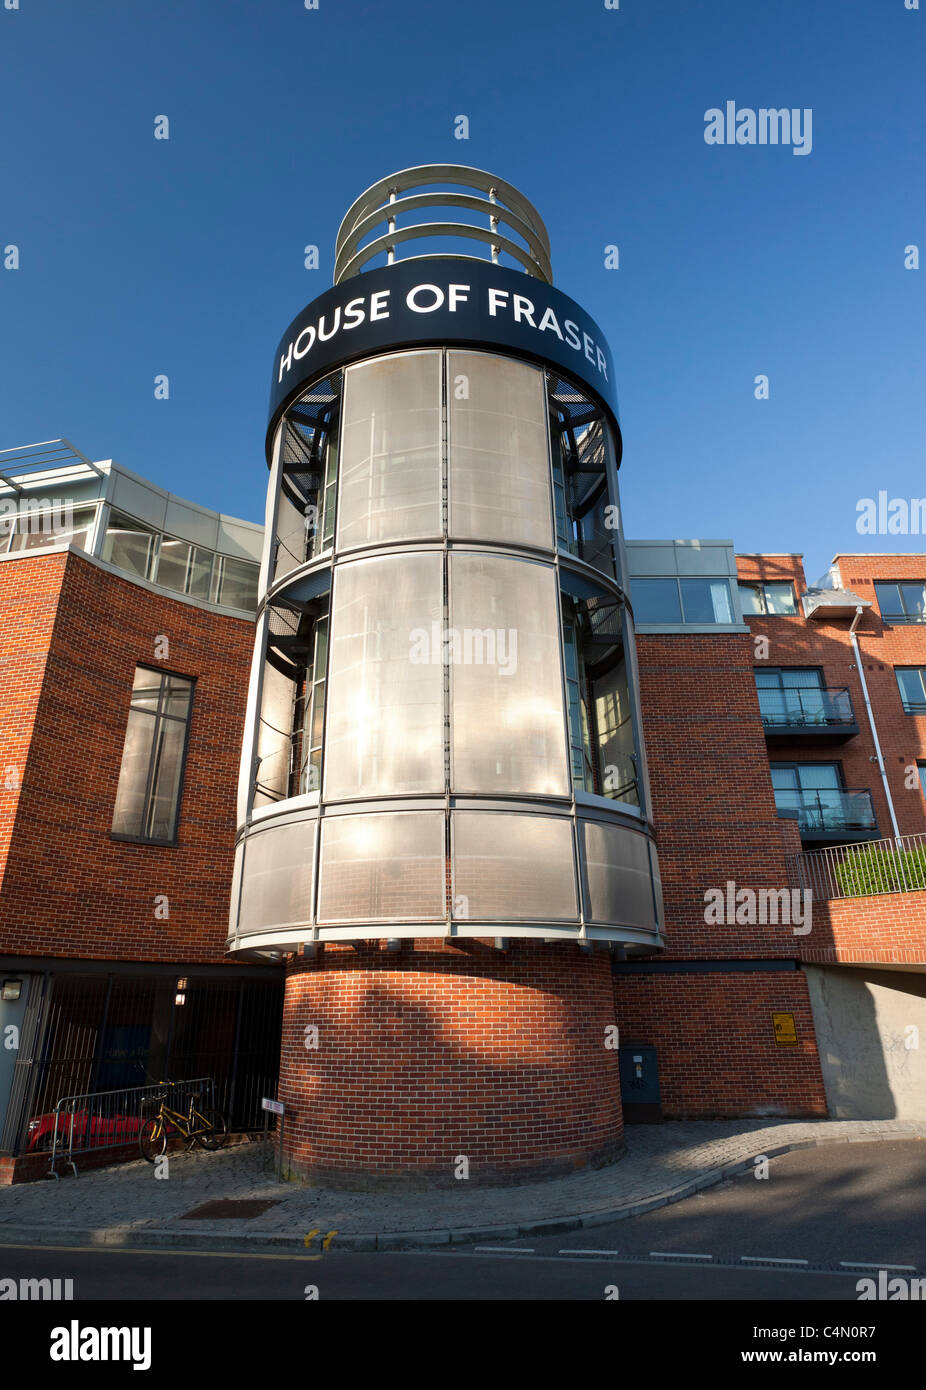 House of Fraser store, Norwich, UK Banque D'Images